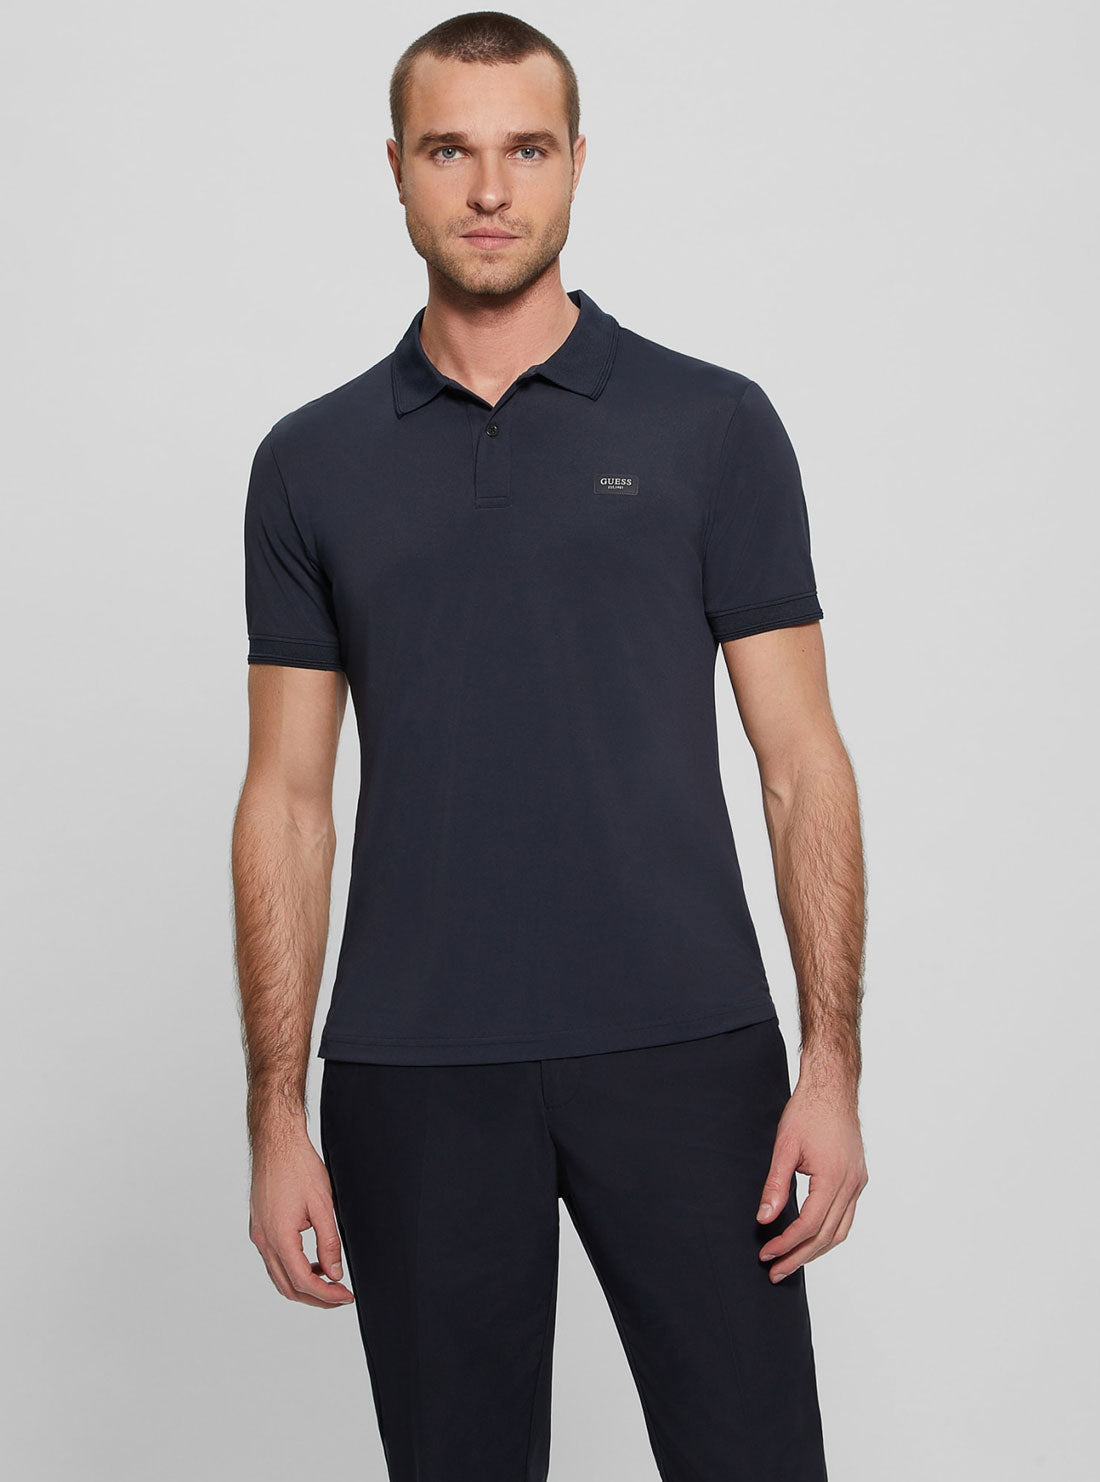 Navy Blue Stretch Polo T-Shirt | GUESS Mens Apparel | front view